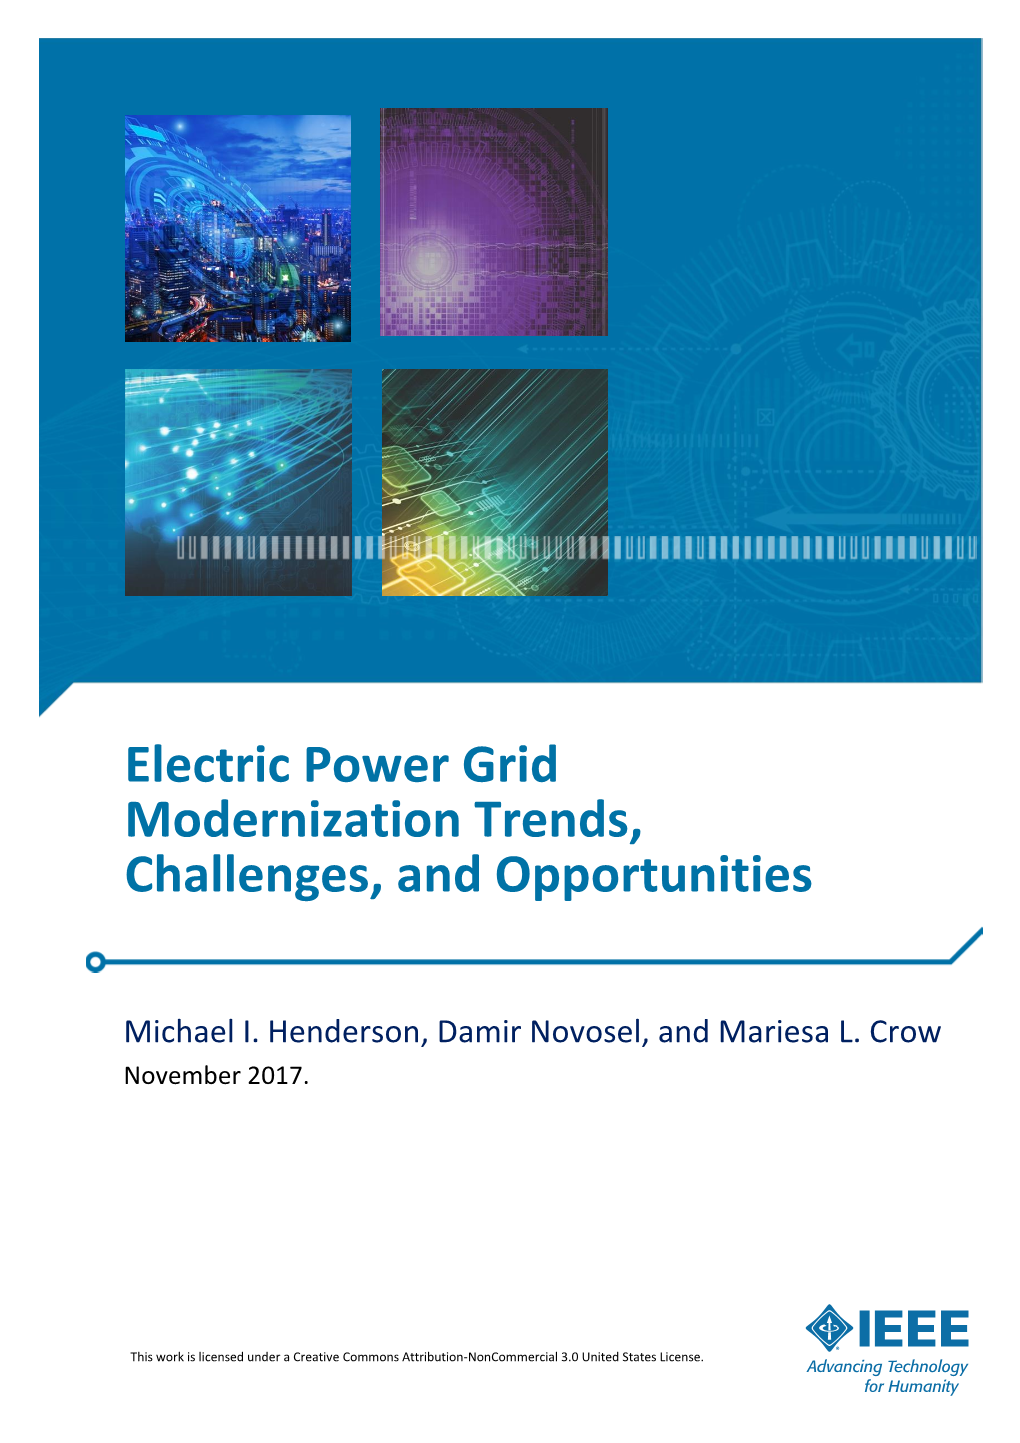 Electric Power Grid Modernization Trends, Challenges, and Opportunities